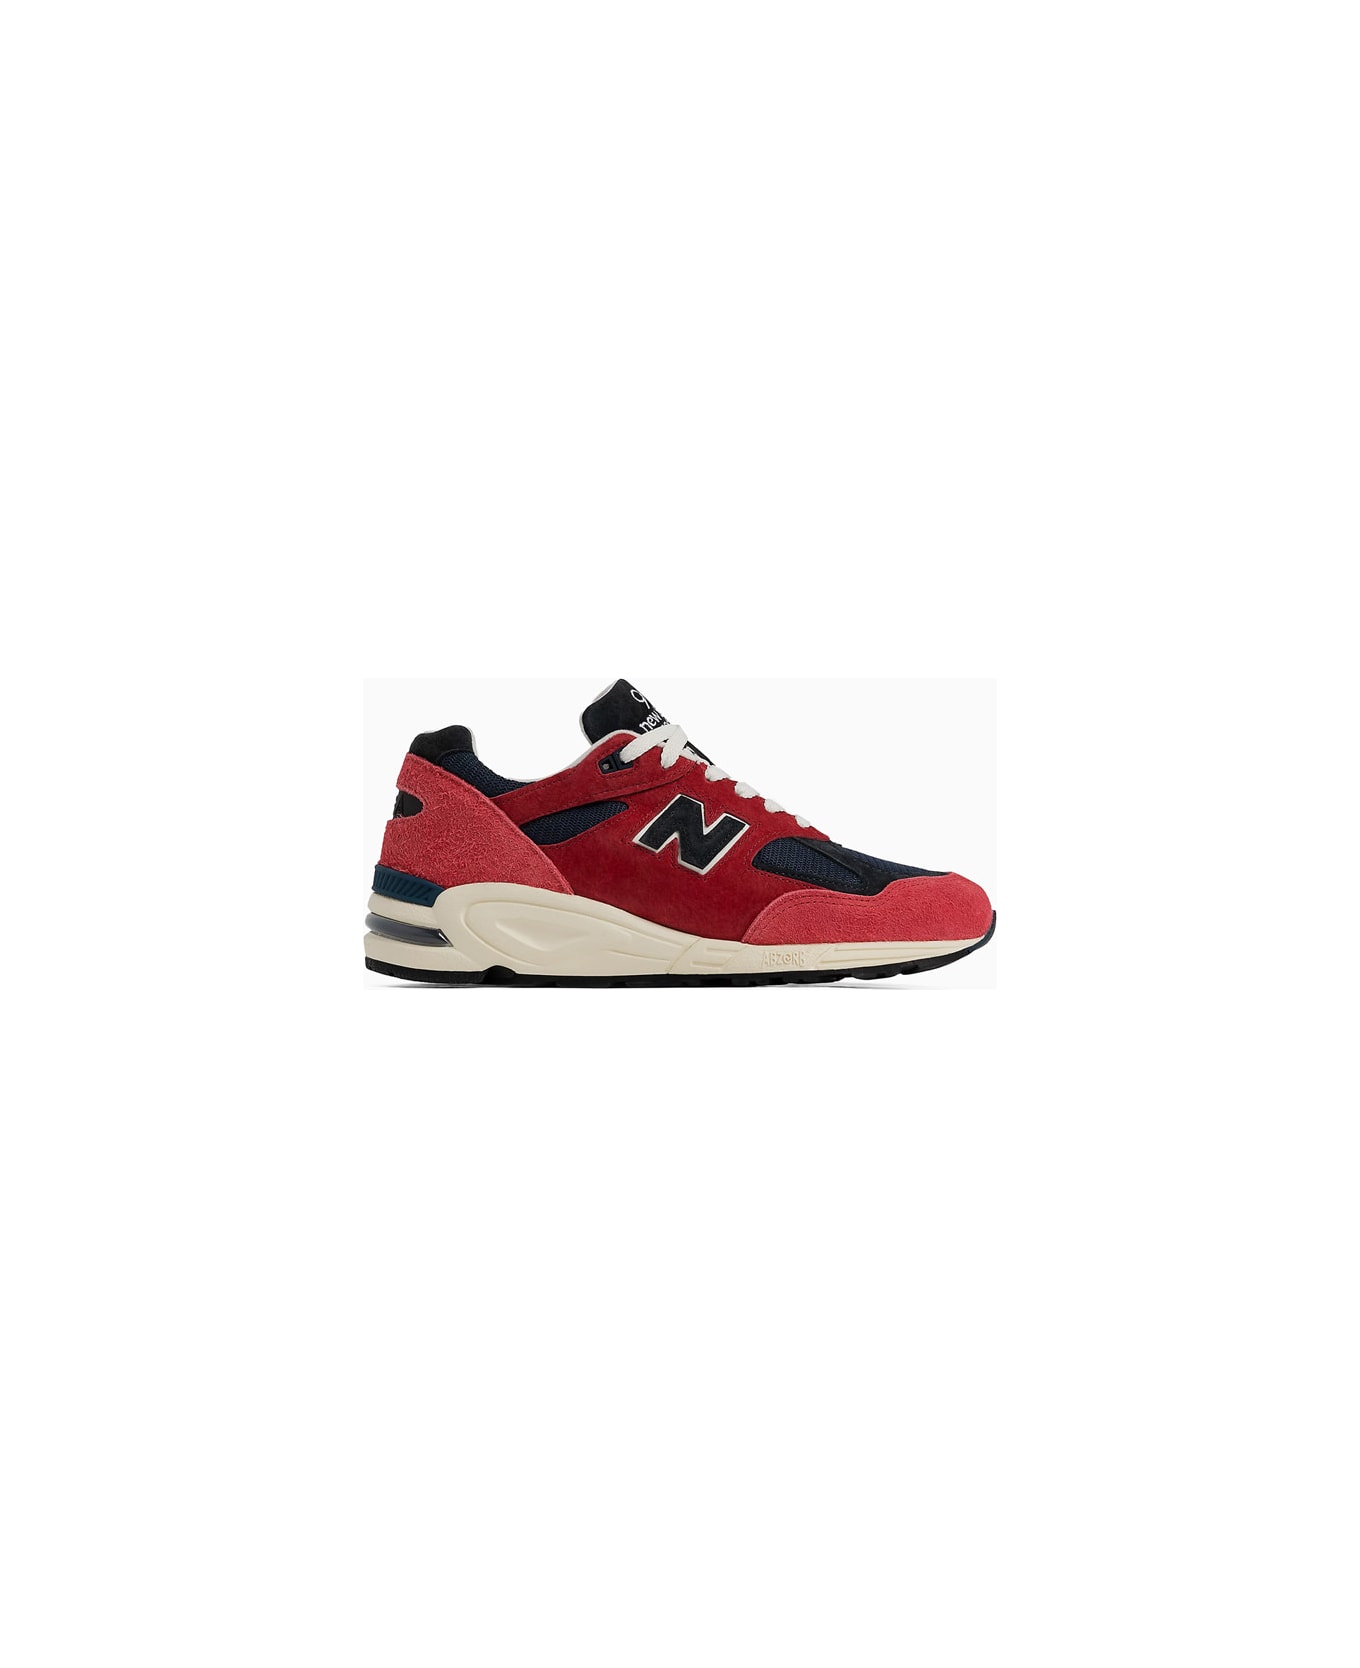 New Balance Sneakers New Balance 990 Made In Usa M990ad2 - RED